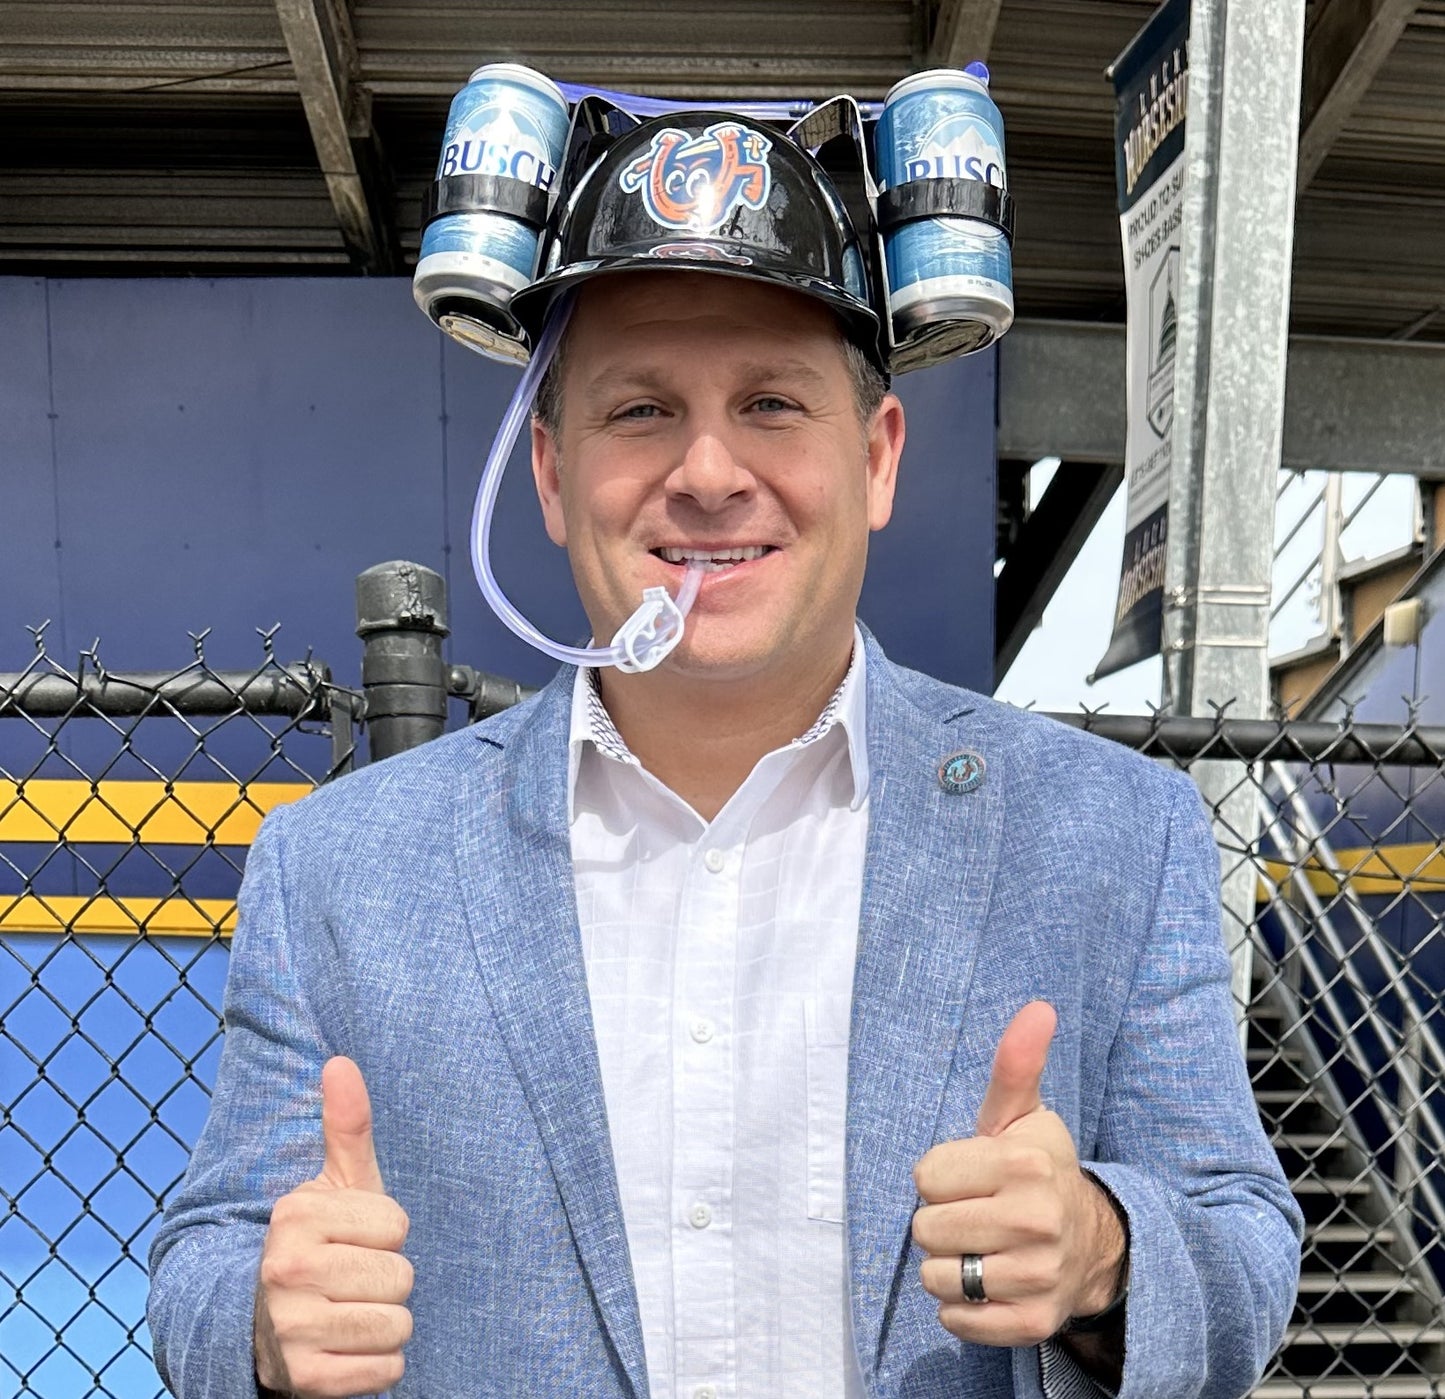 Professional Beer Drinking Hat! - Go 'Shoes!